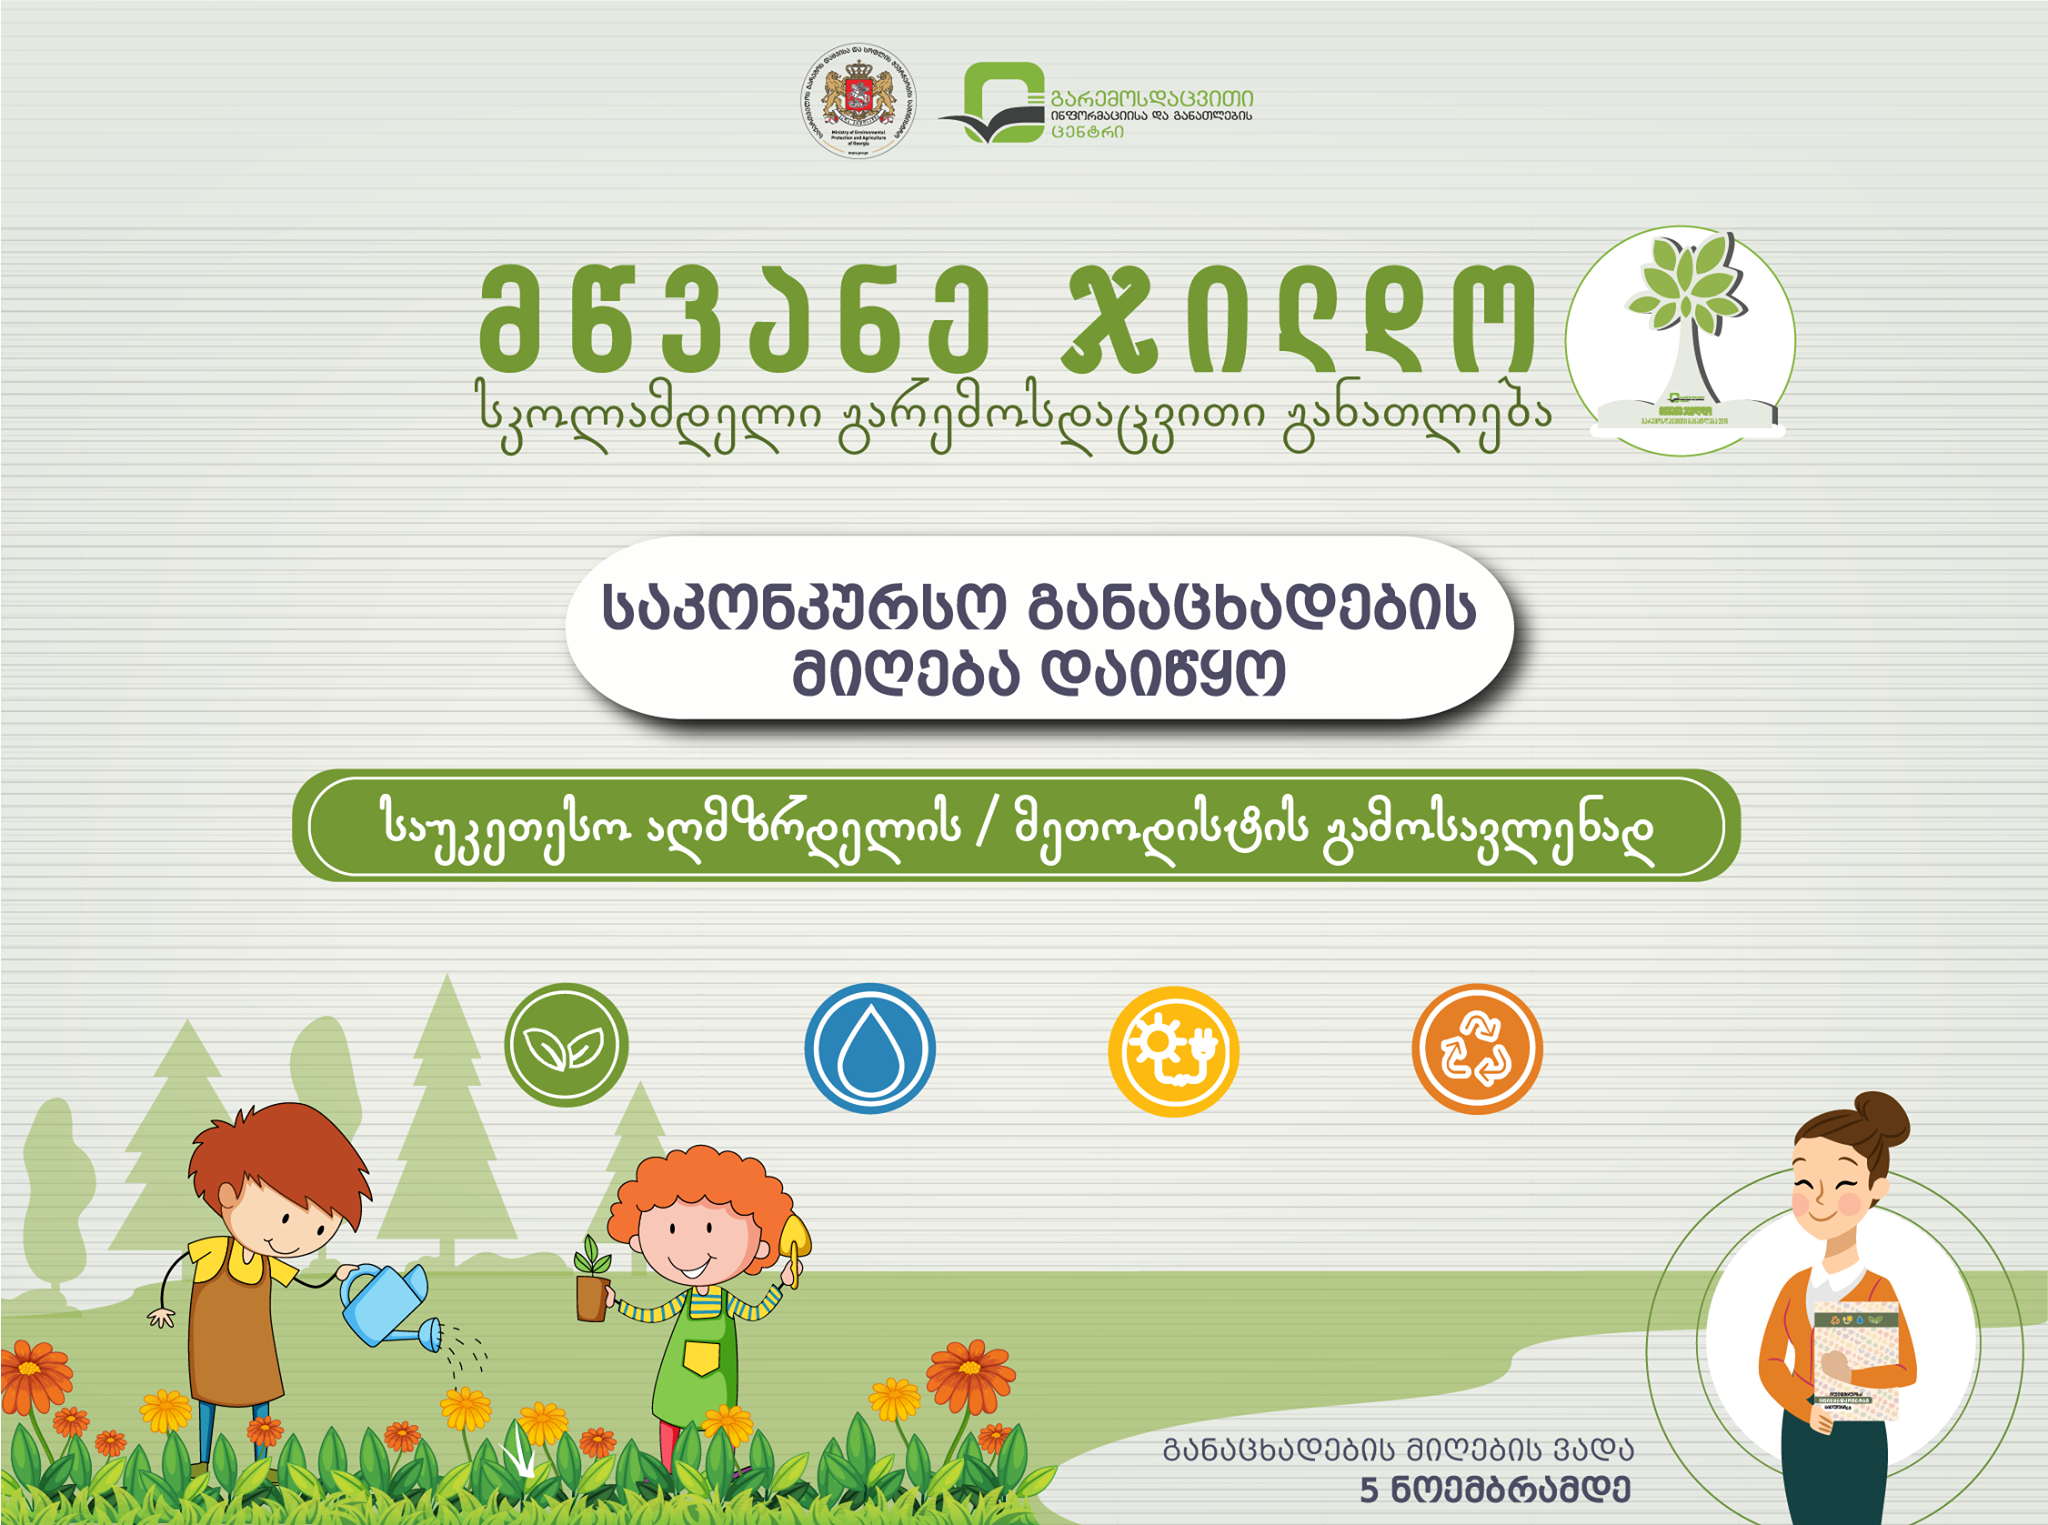 The "Green Award" contest seeks to identify the best educator (both teacher and methodologist